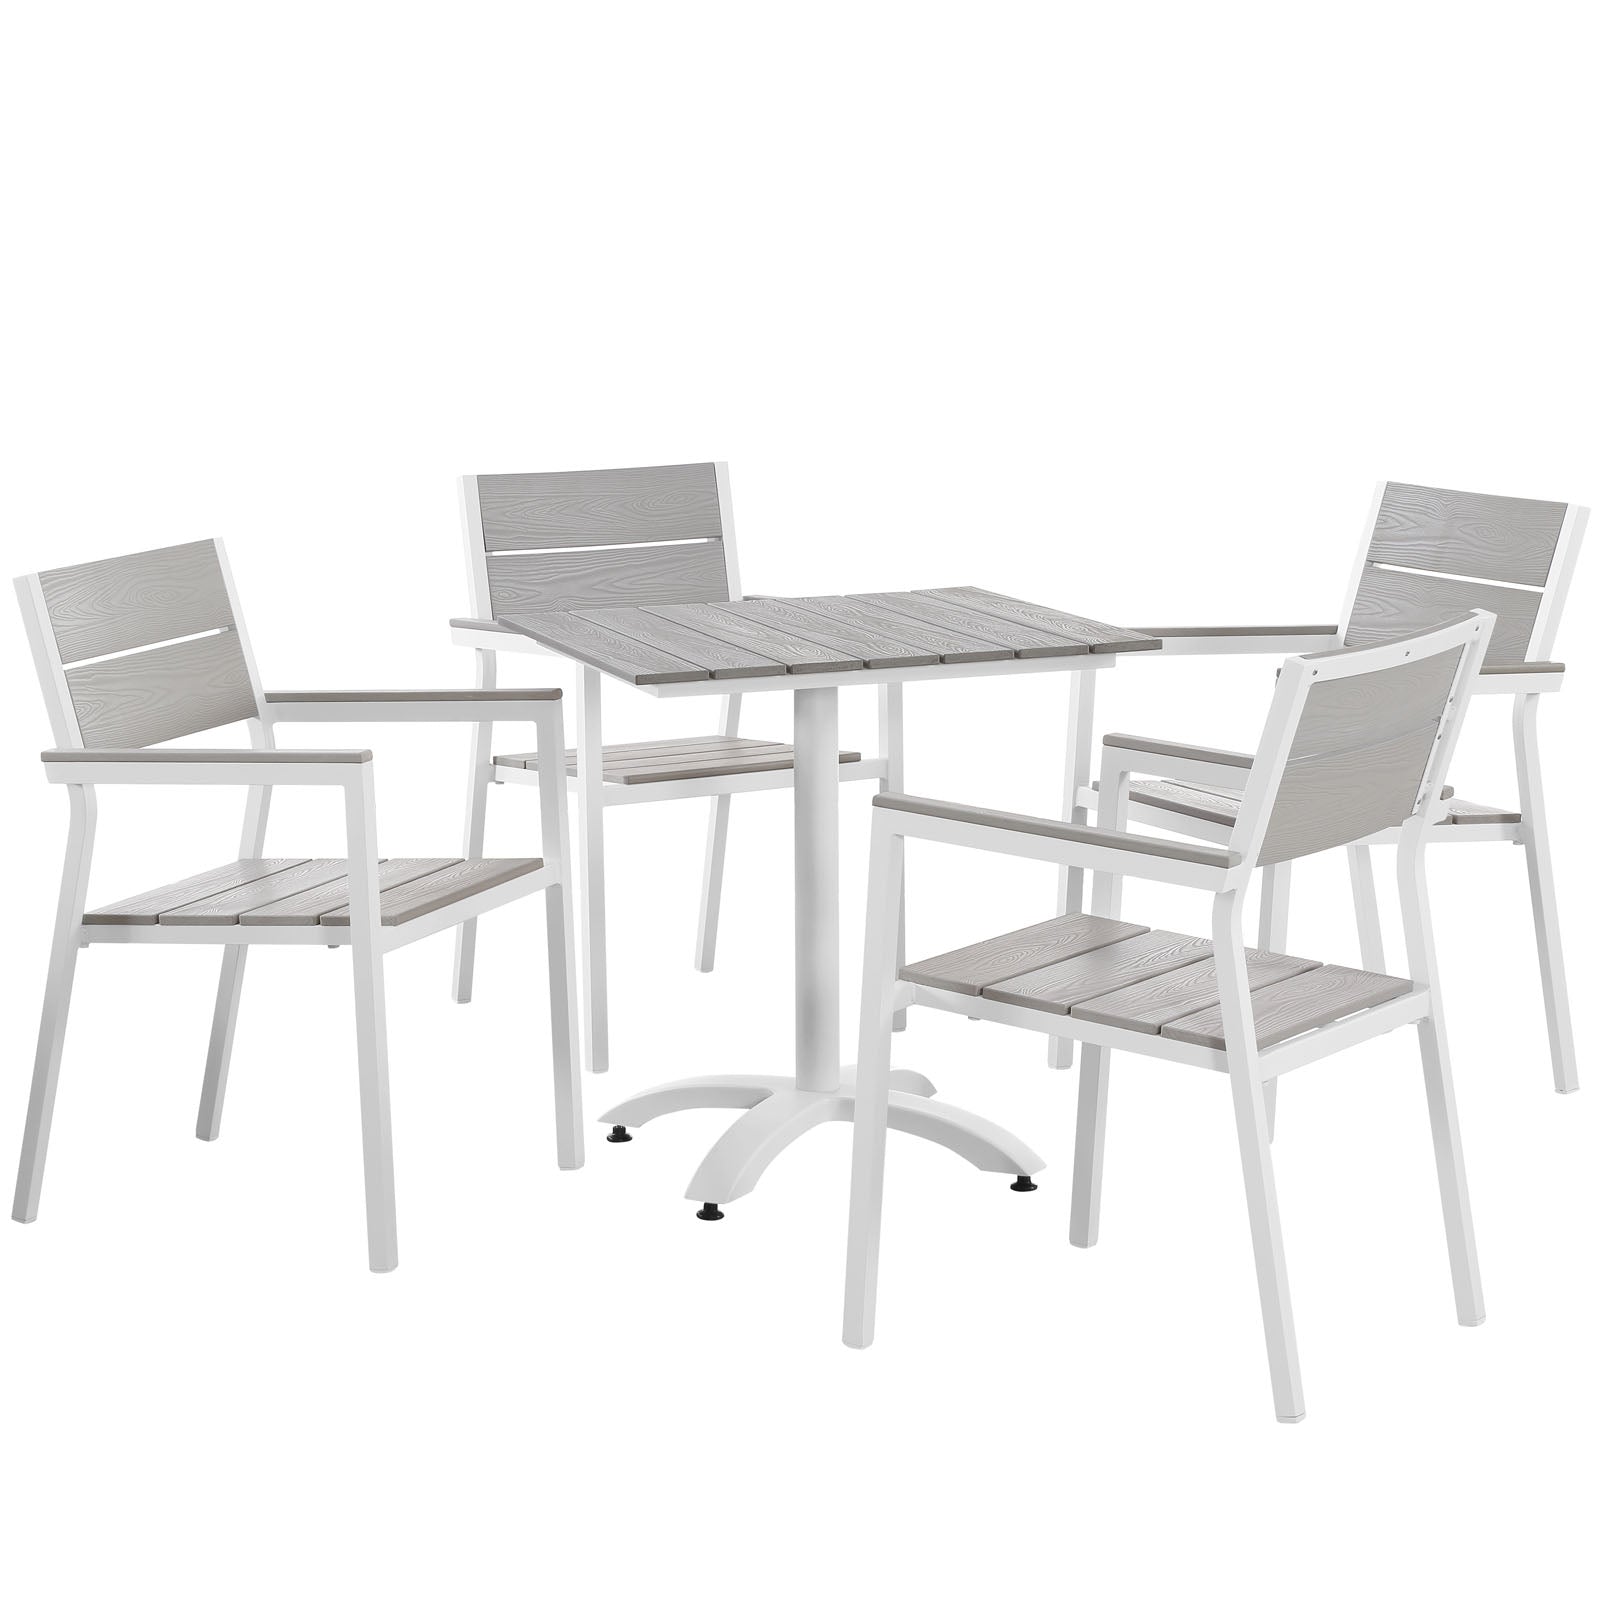 Modway Outdoor Dining Sets - Maine 5 Piece Outdoor Patio Dining Set White Light Gray